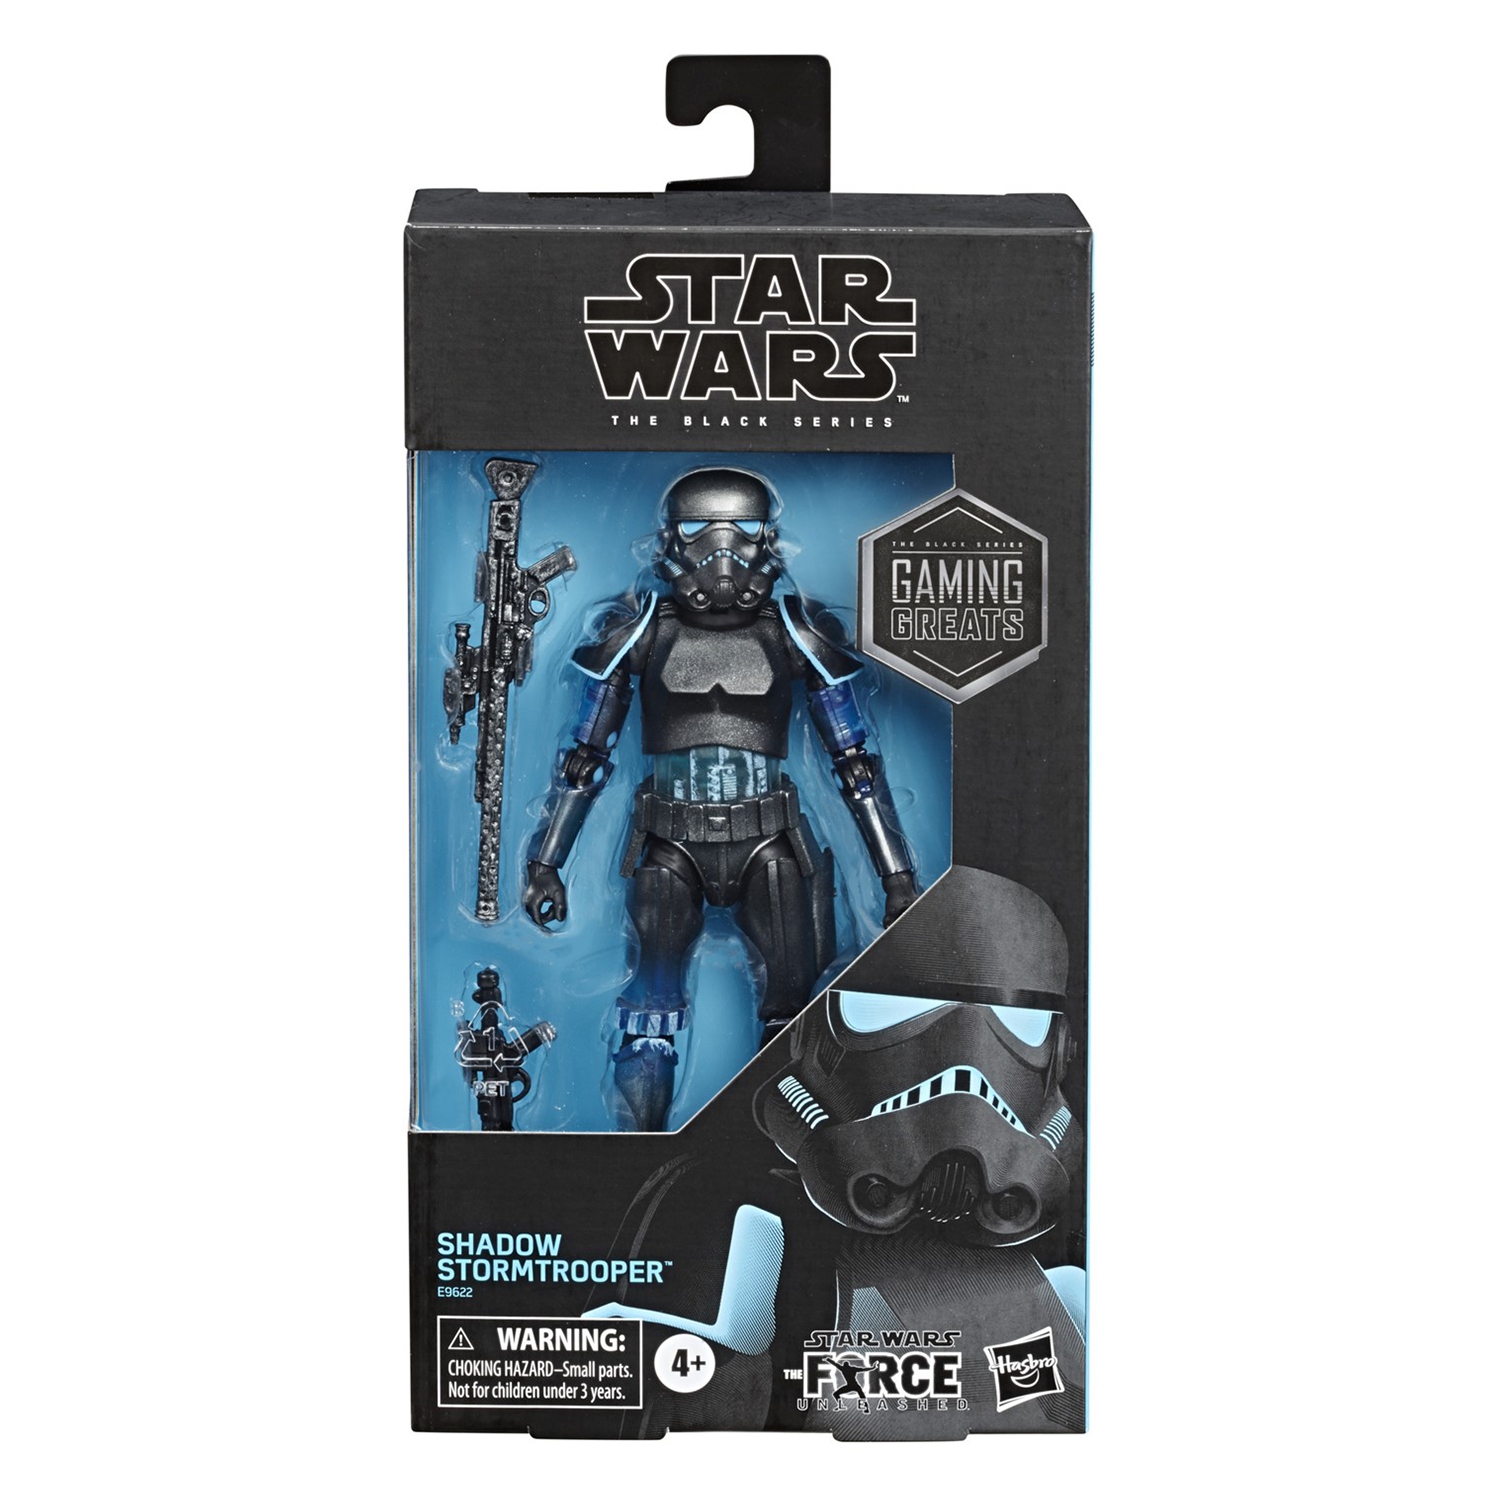 Star Wars The Black Series Gaming Greats 6 Inch Action Figure Box Art Exclusive - Shadow Stormtrooper